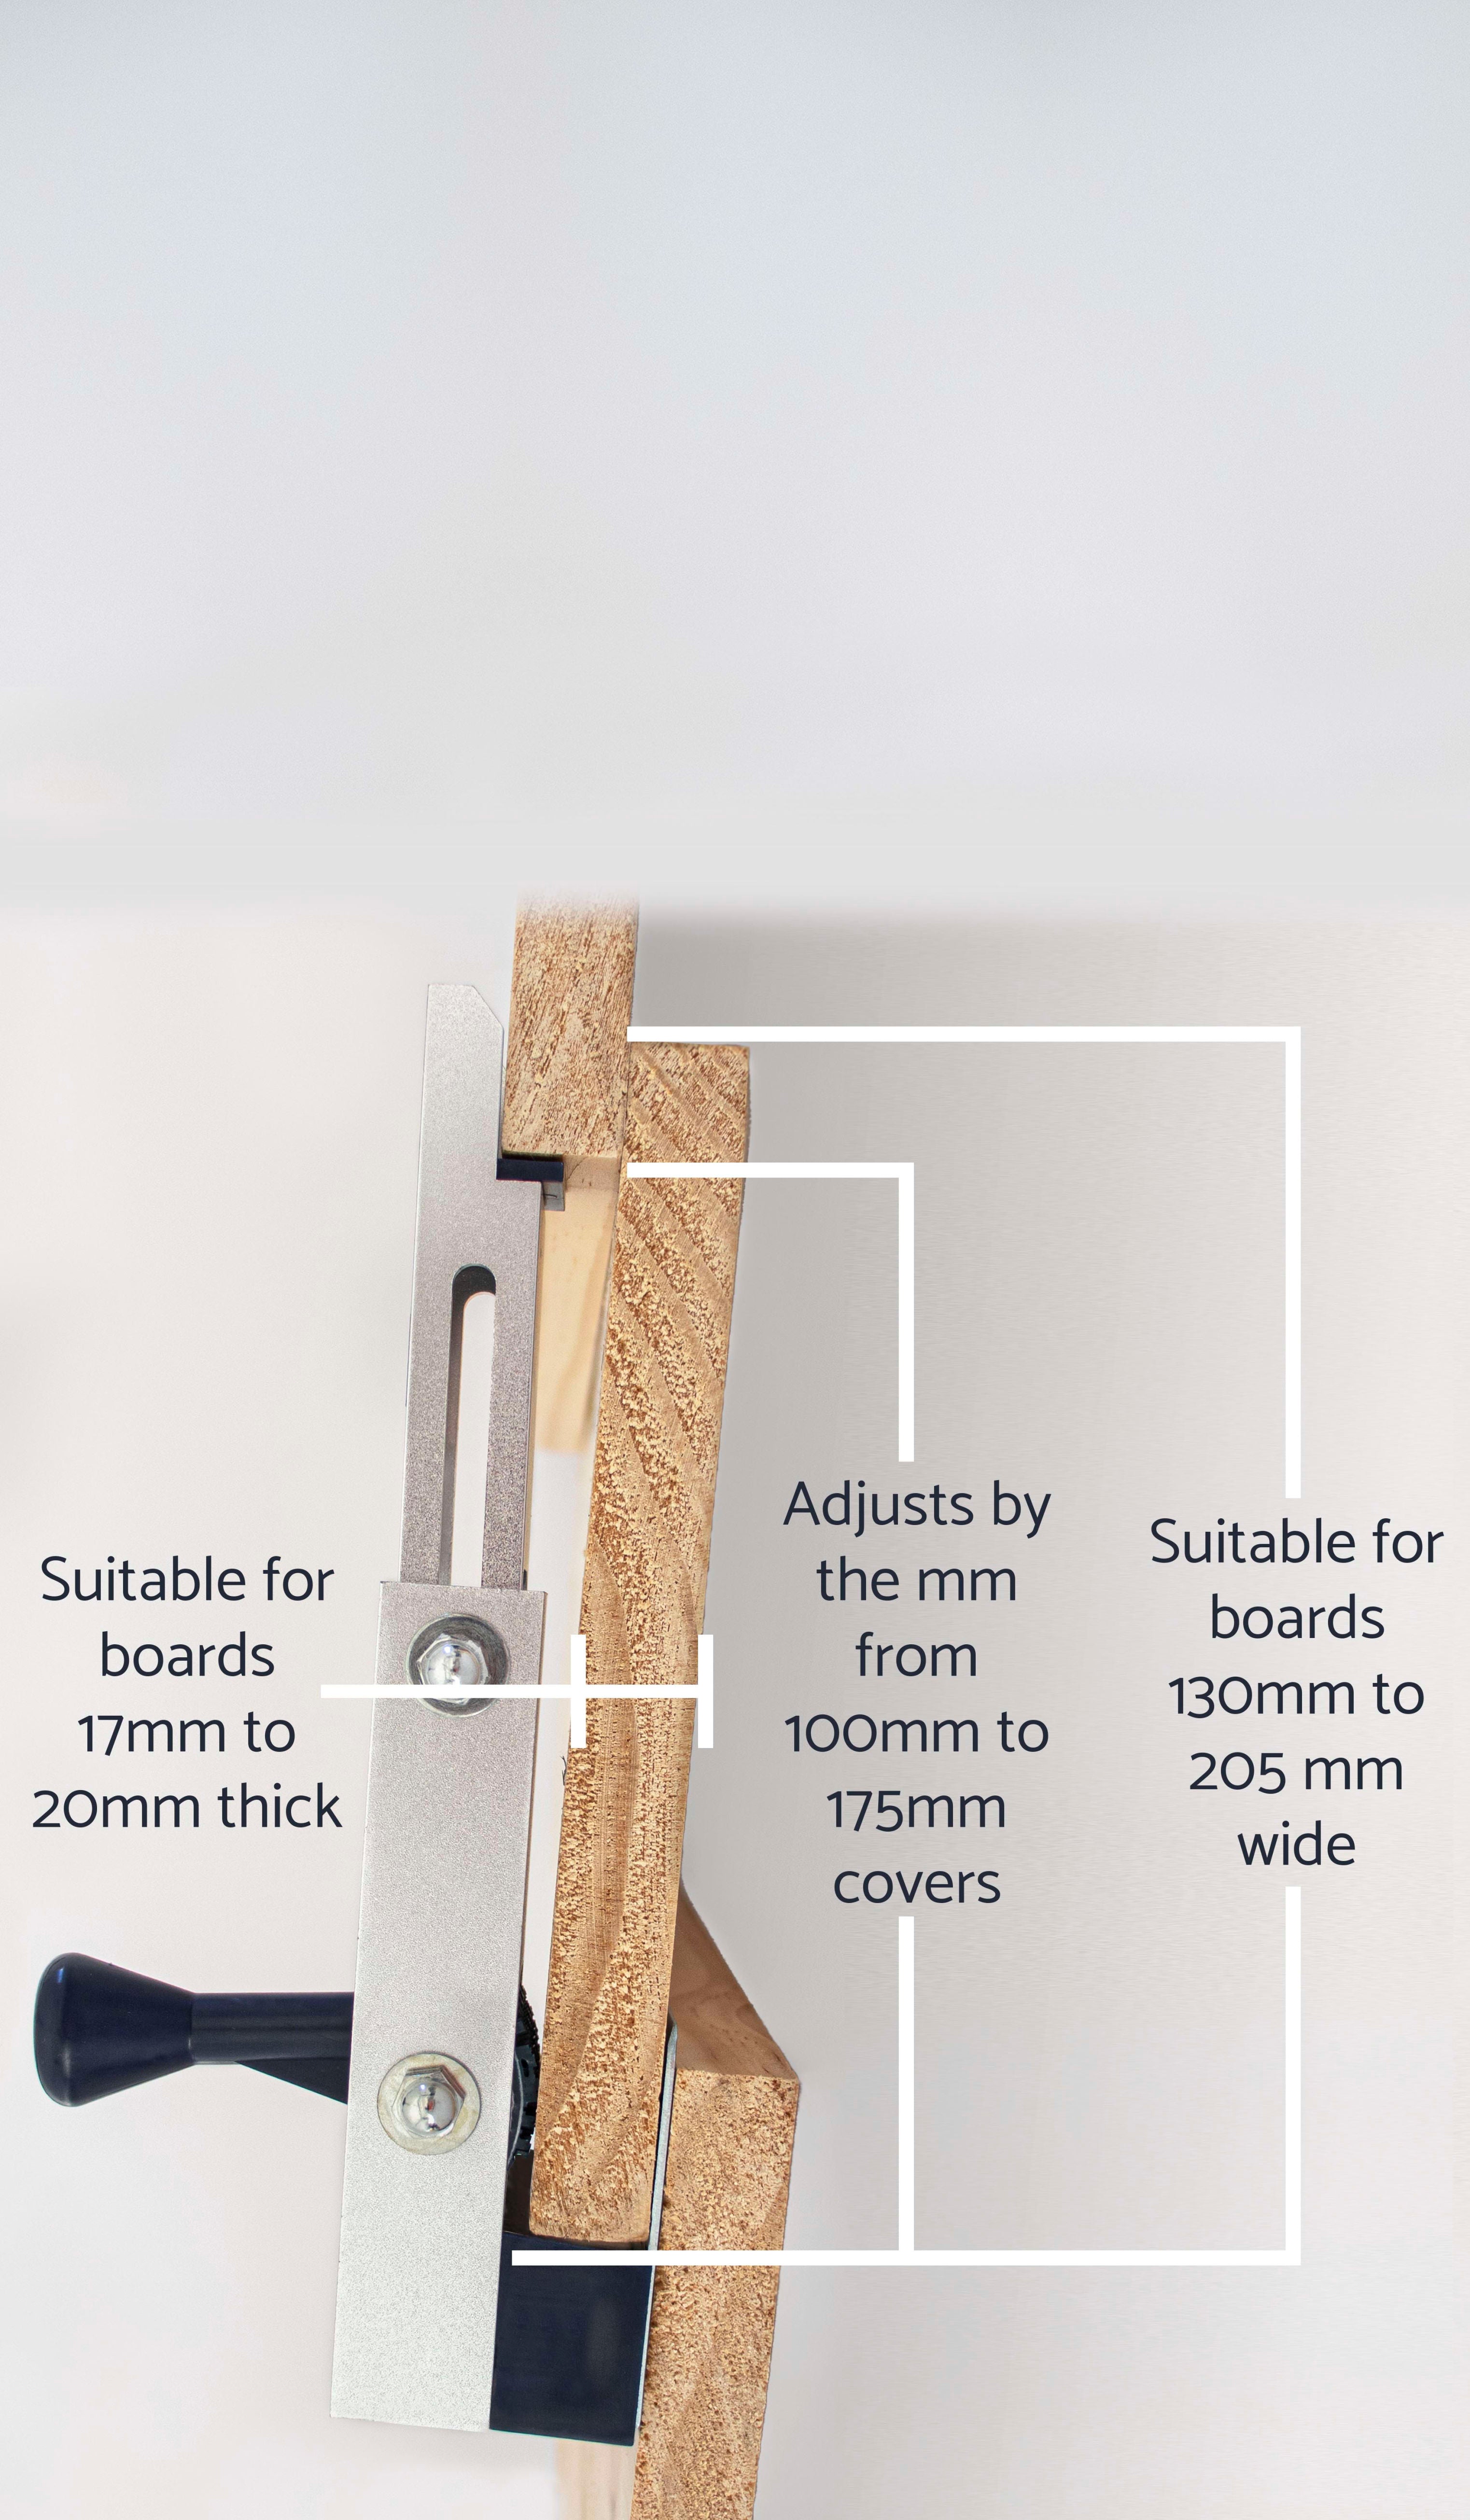 Get the perfect lap on your weatherboards with CladMate